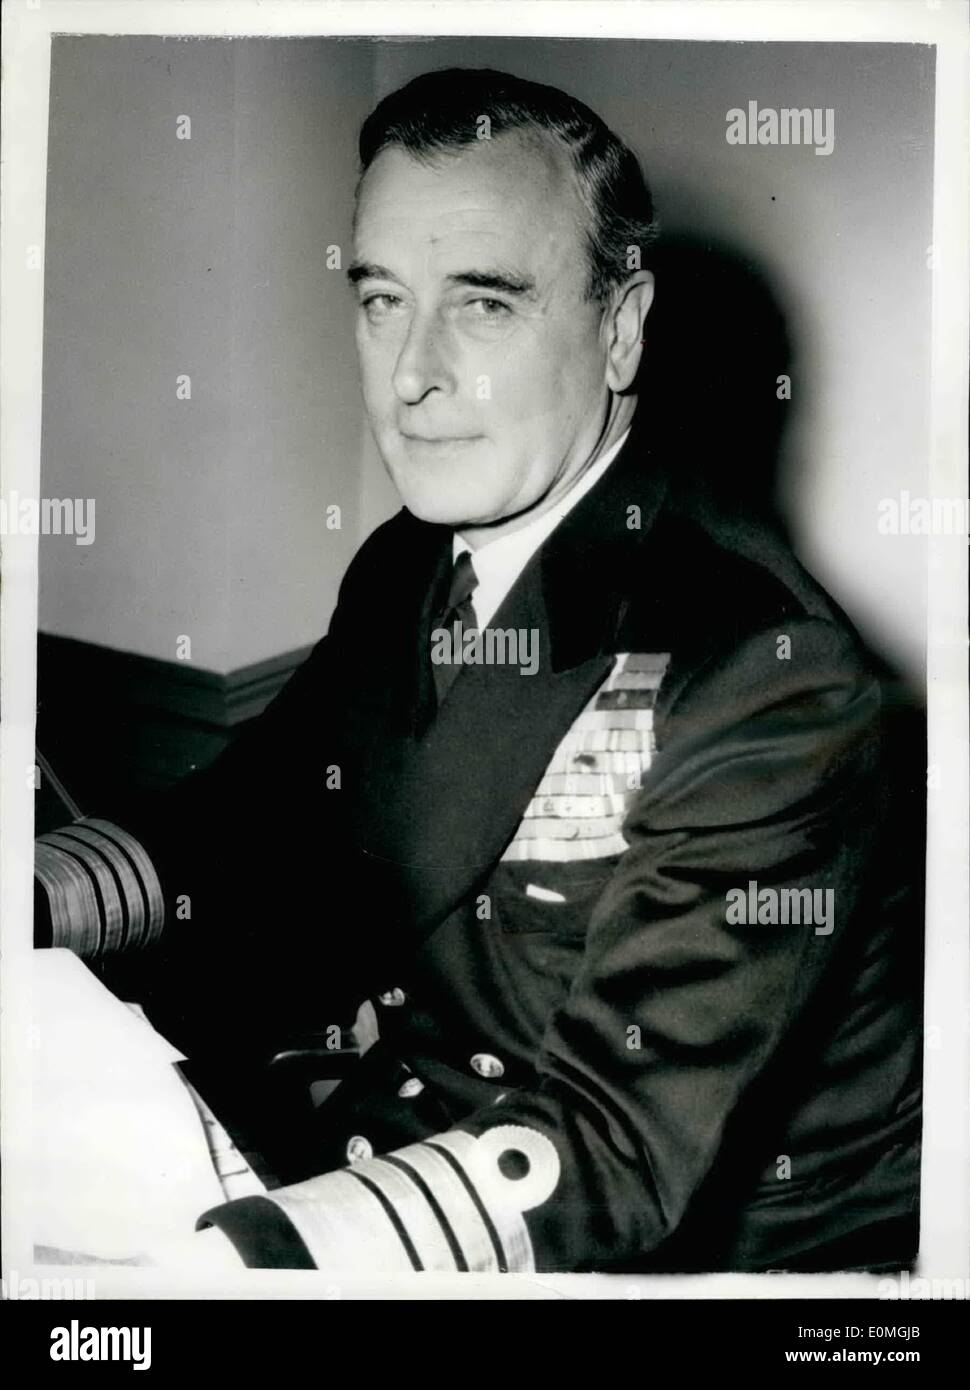 Apr. 04, 1955 - Earl Mountbatten Assumes His Duties As First Sea Lord: Earl Mountbatten, 57, a cousin of Queen Elizabeth II, and uncle of the Duke of Edinburgh, has assumed his duties as First Sea Lord. Until recently he commanded the British Mediterranean Fleet and the Mediterranean naval and air forces of North Atlantic Treaty organization countries. For the last month he has been making a round of inspections of naval bases and Admiralty departments in all parts of the country. Photo Shows: Admiral Earl Mountbatten of Burma, pictured in his room at the Admiralty this morning. Stock Photo